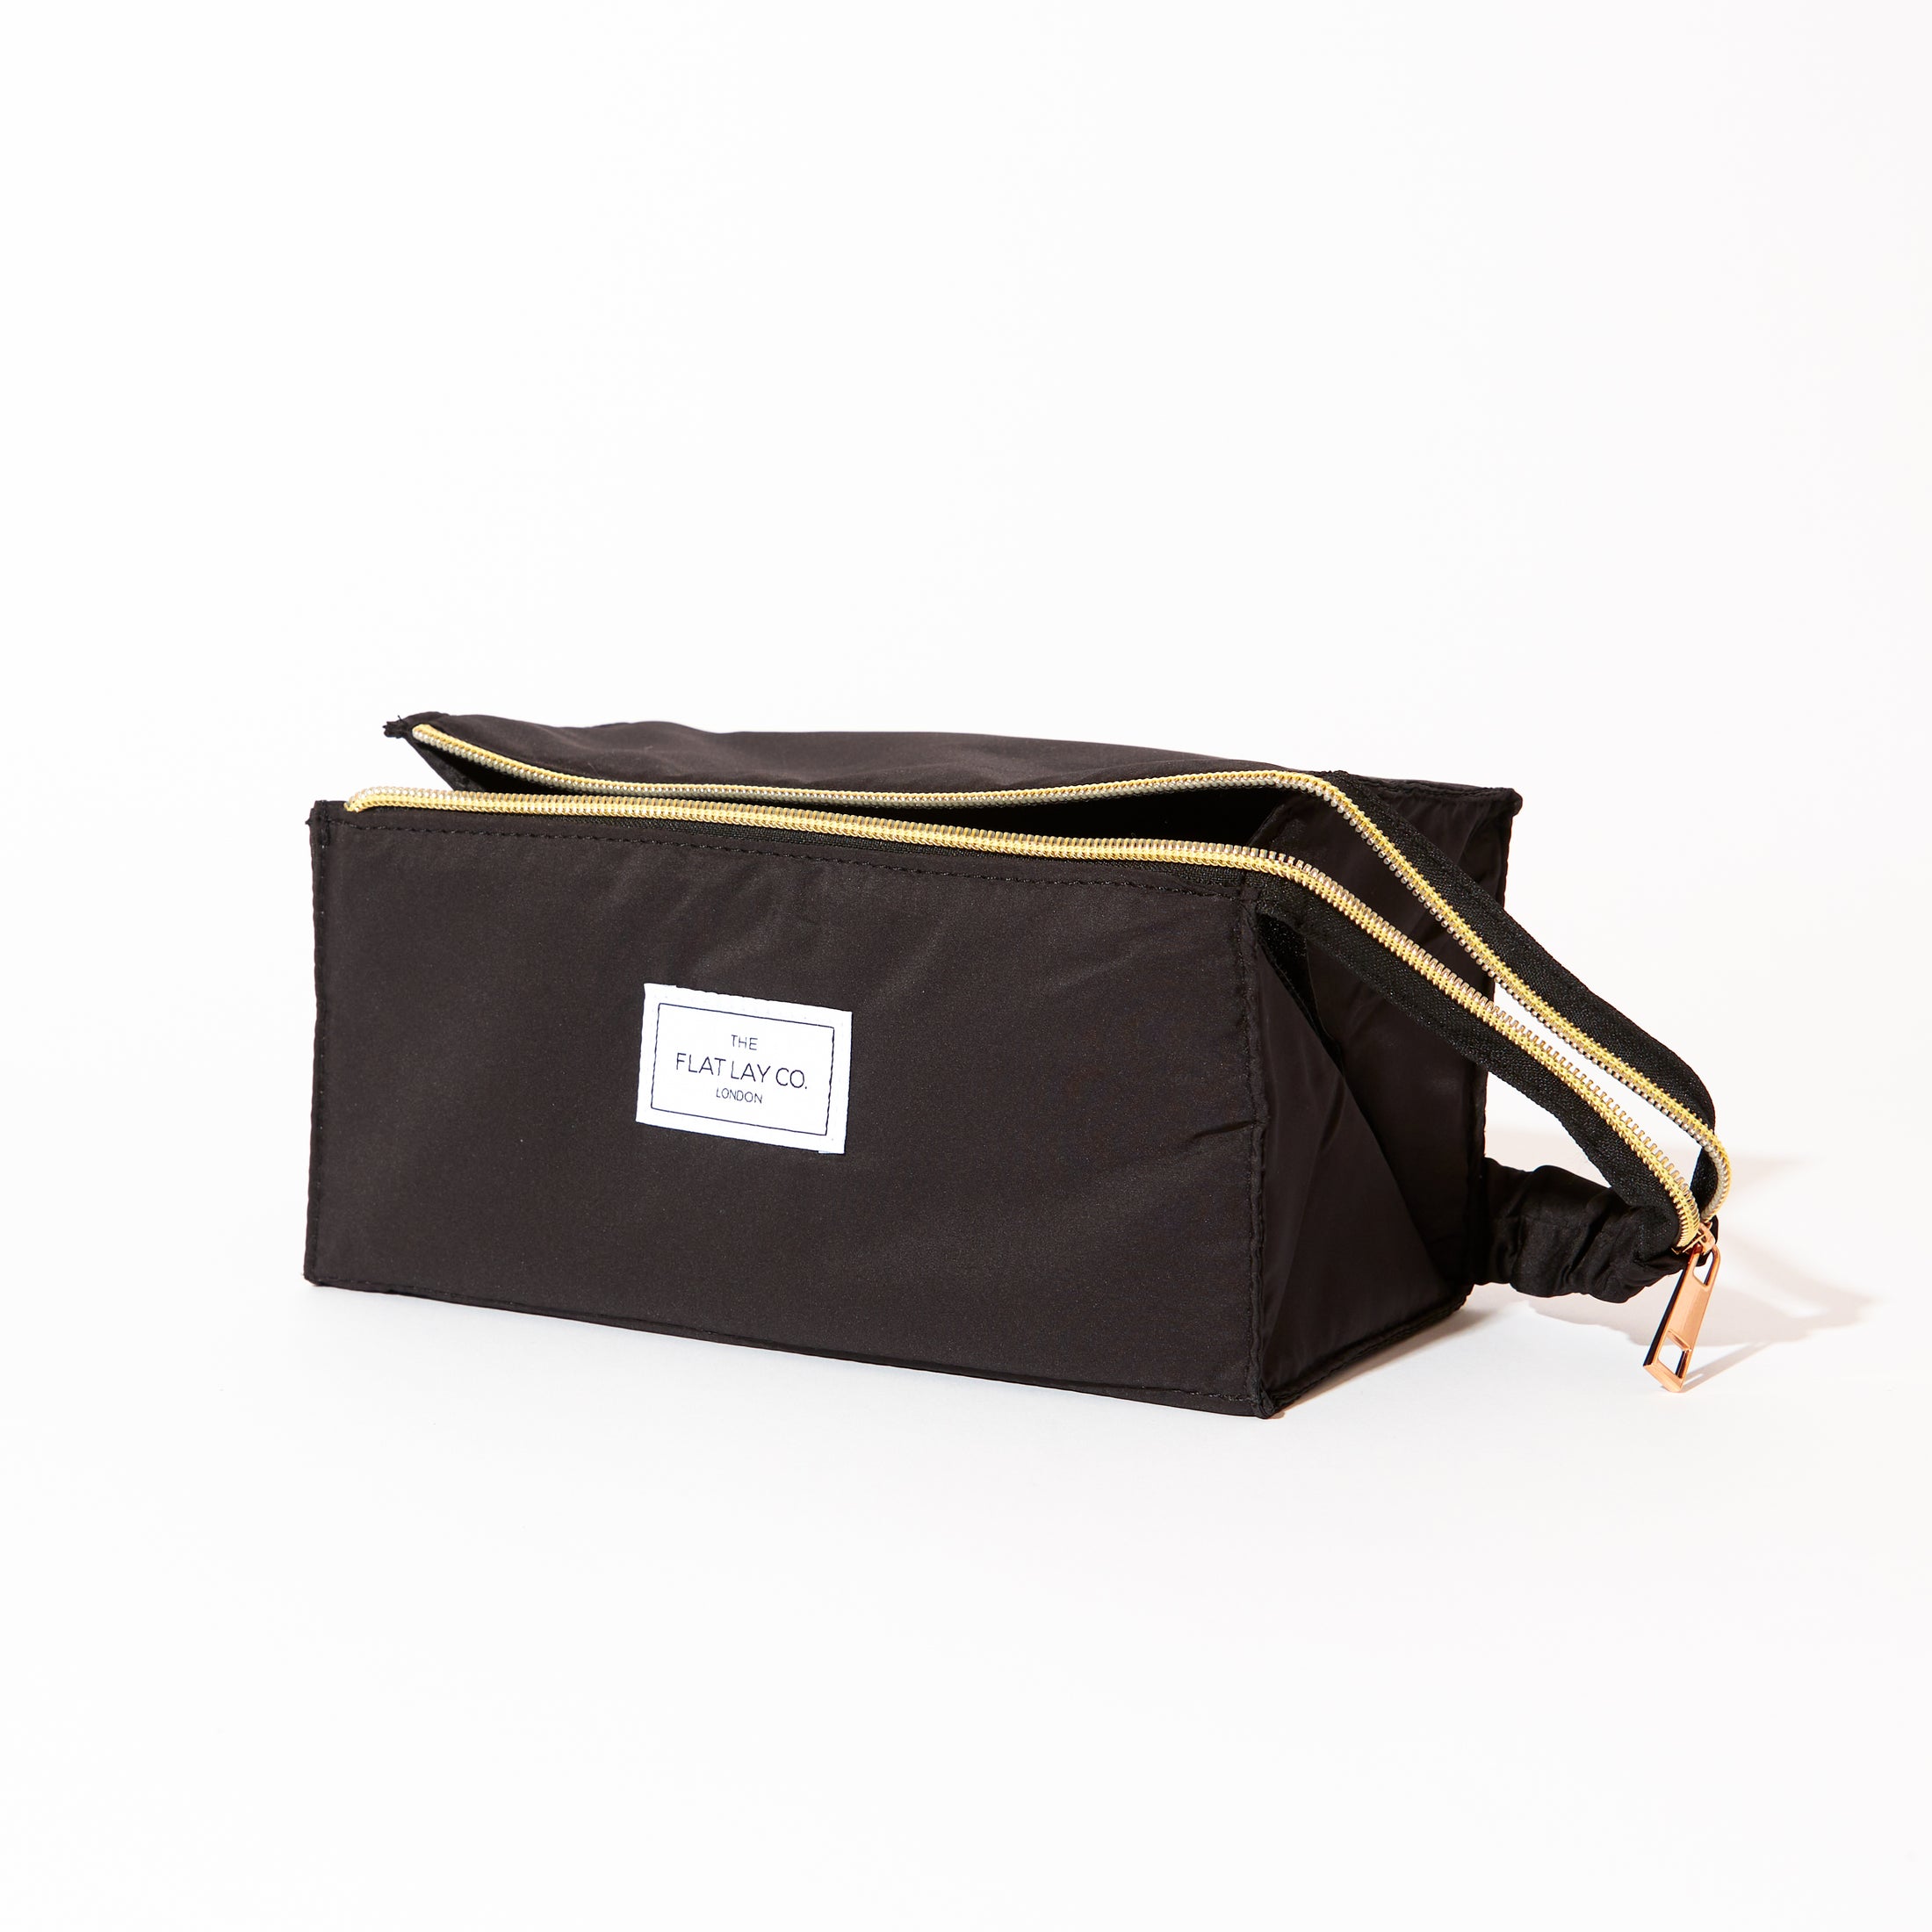 Classic Black Open Flat Makeup Box Bag and Tray – The Flat Lay Co.